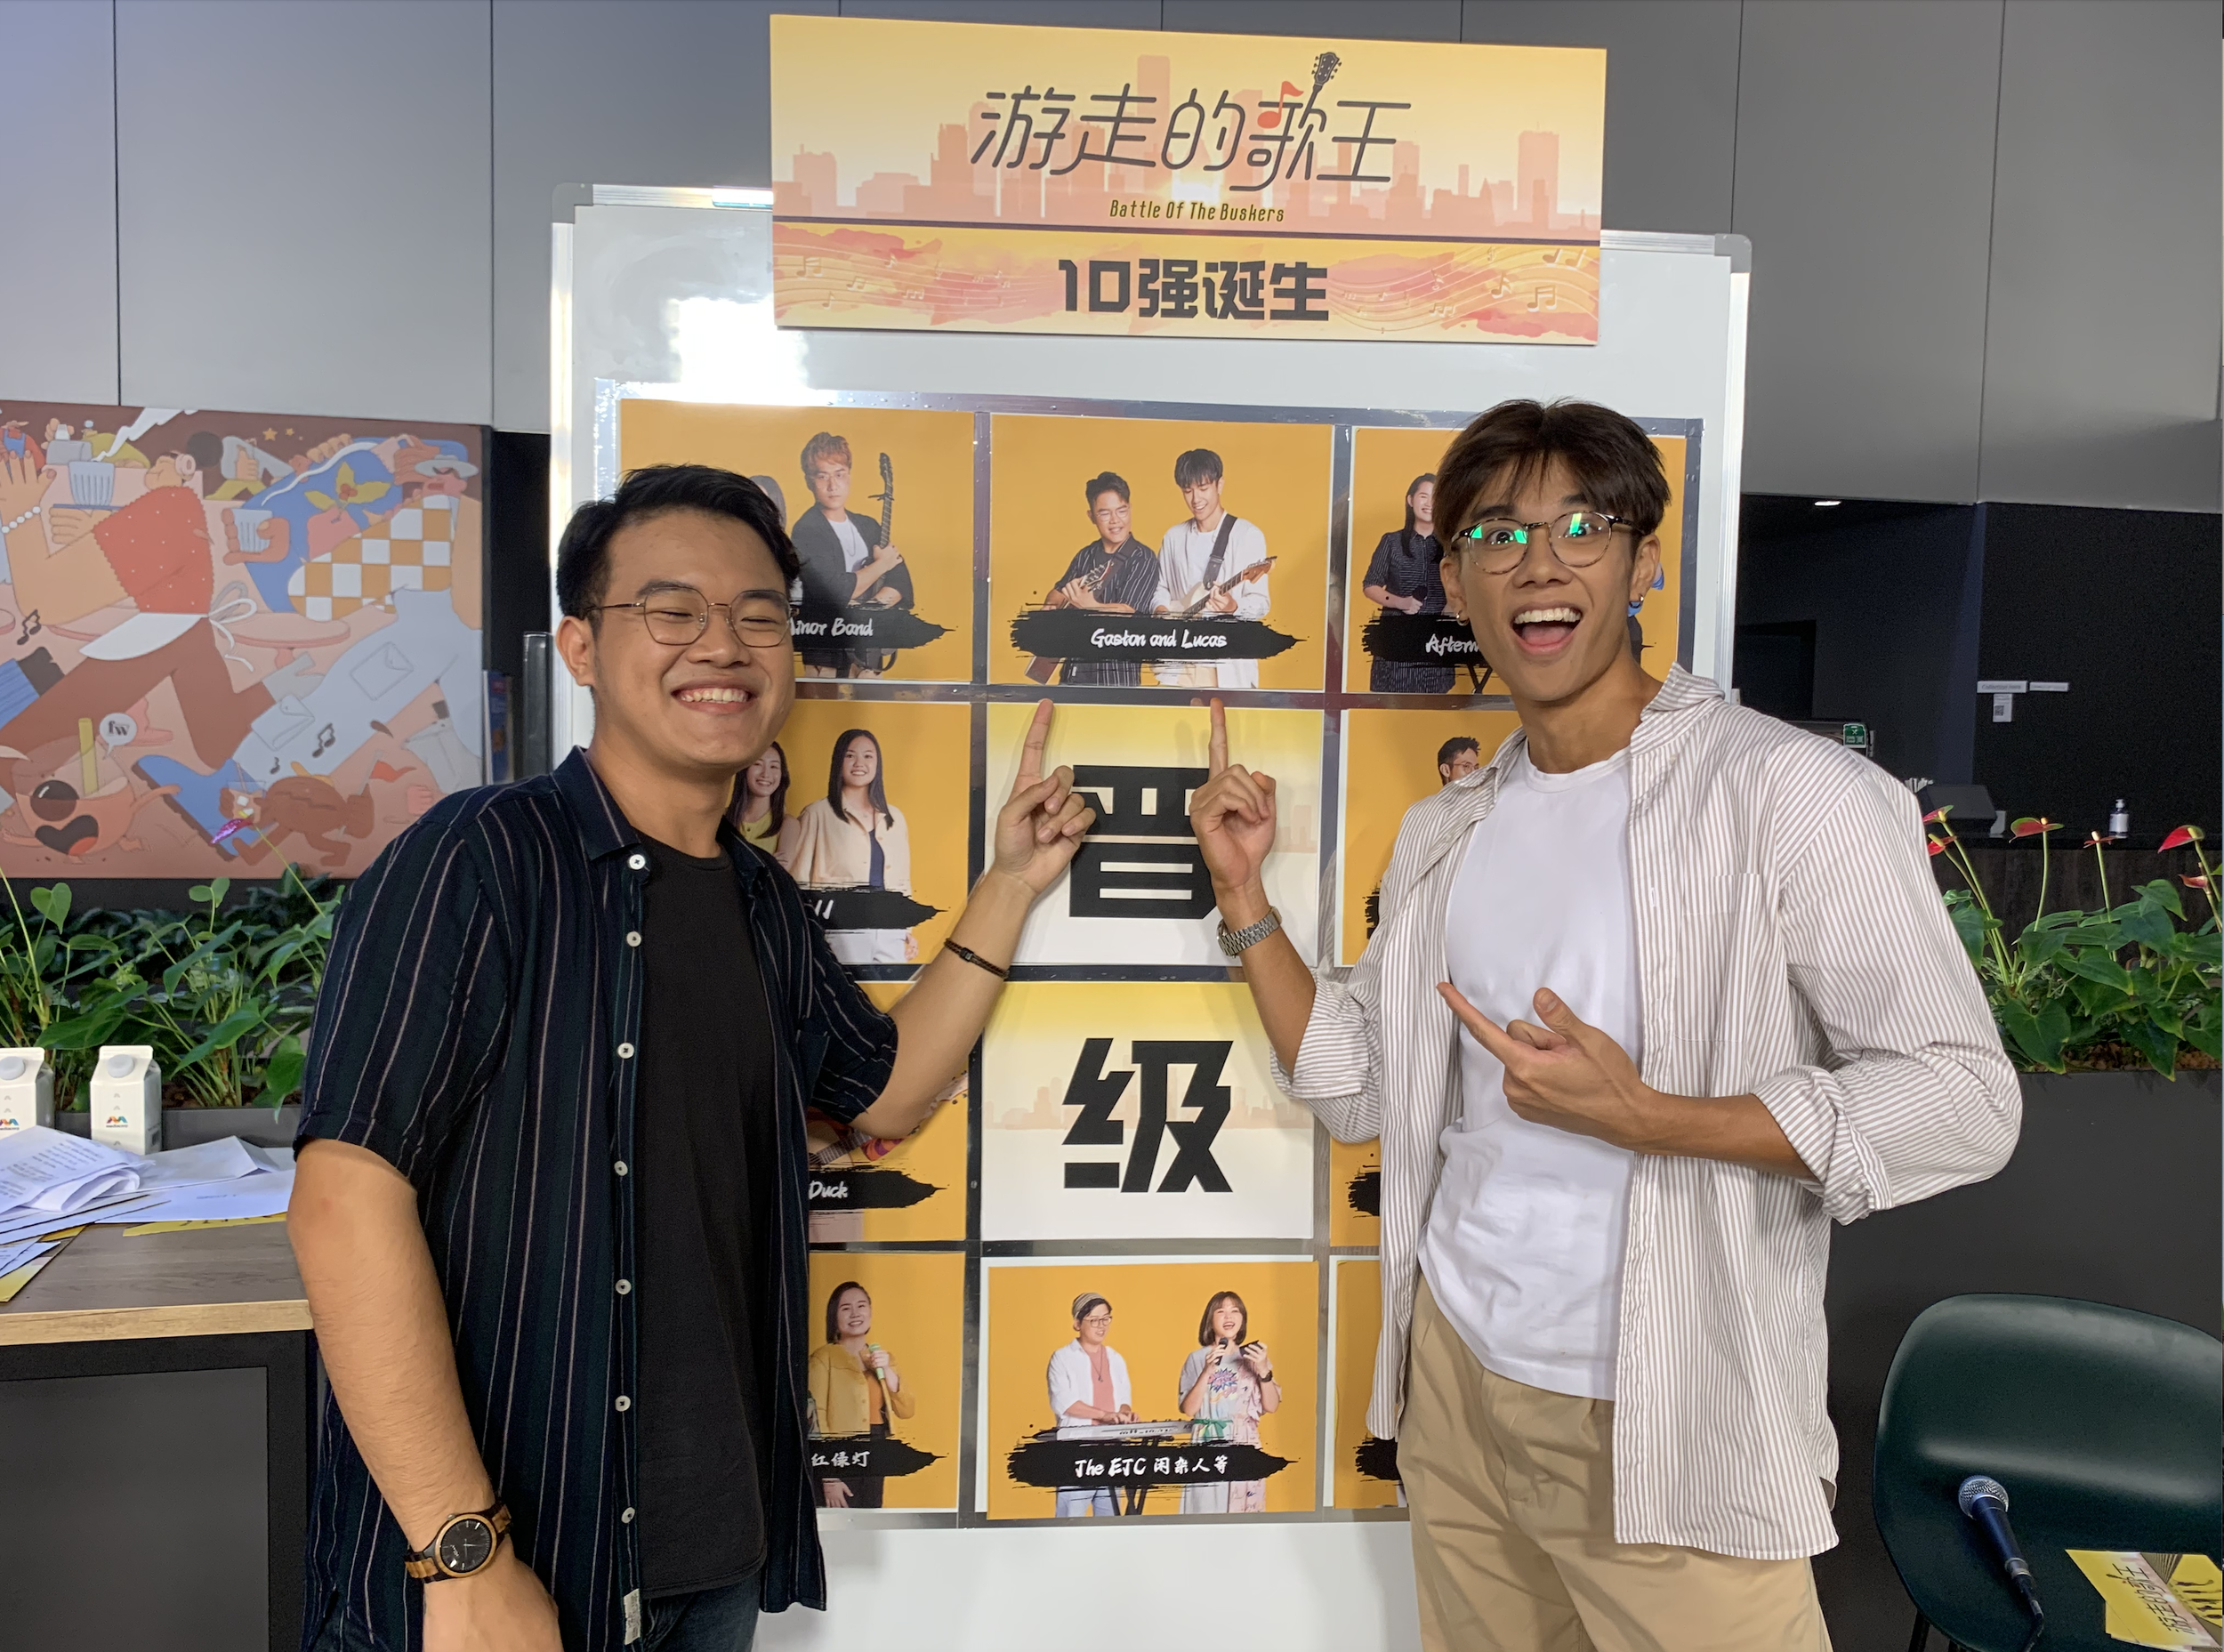 Lucas and Gaston making it to the Top 10 for Mediacorp's Battle of the Buskers